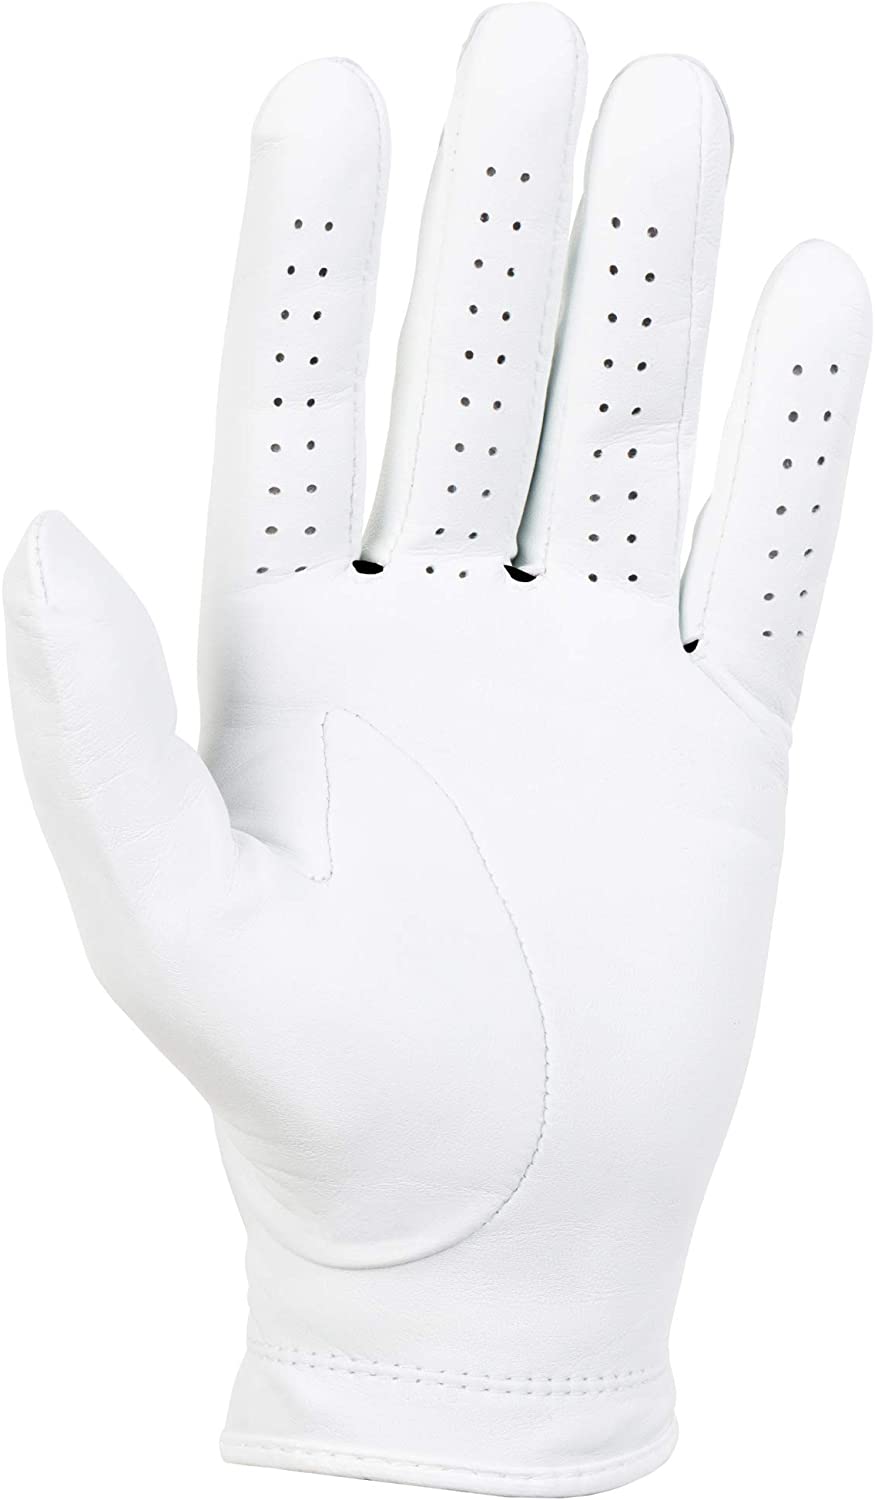 Titleist Players Men's Golf Glove Left X-Large (worn on left hand) - image 3 of 4